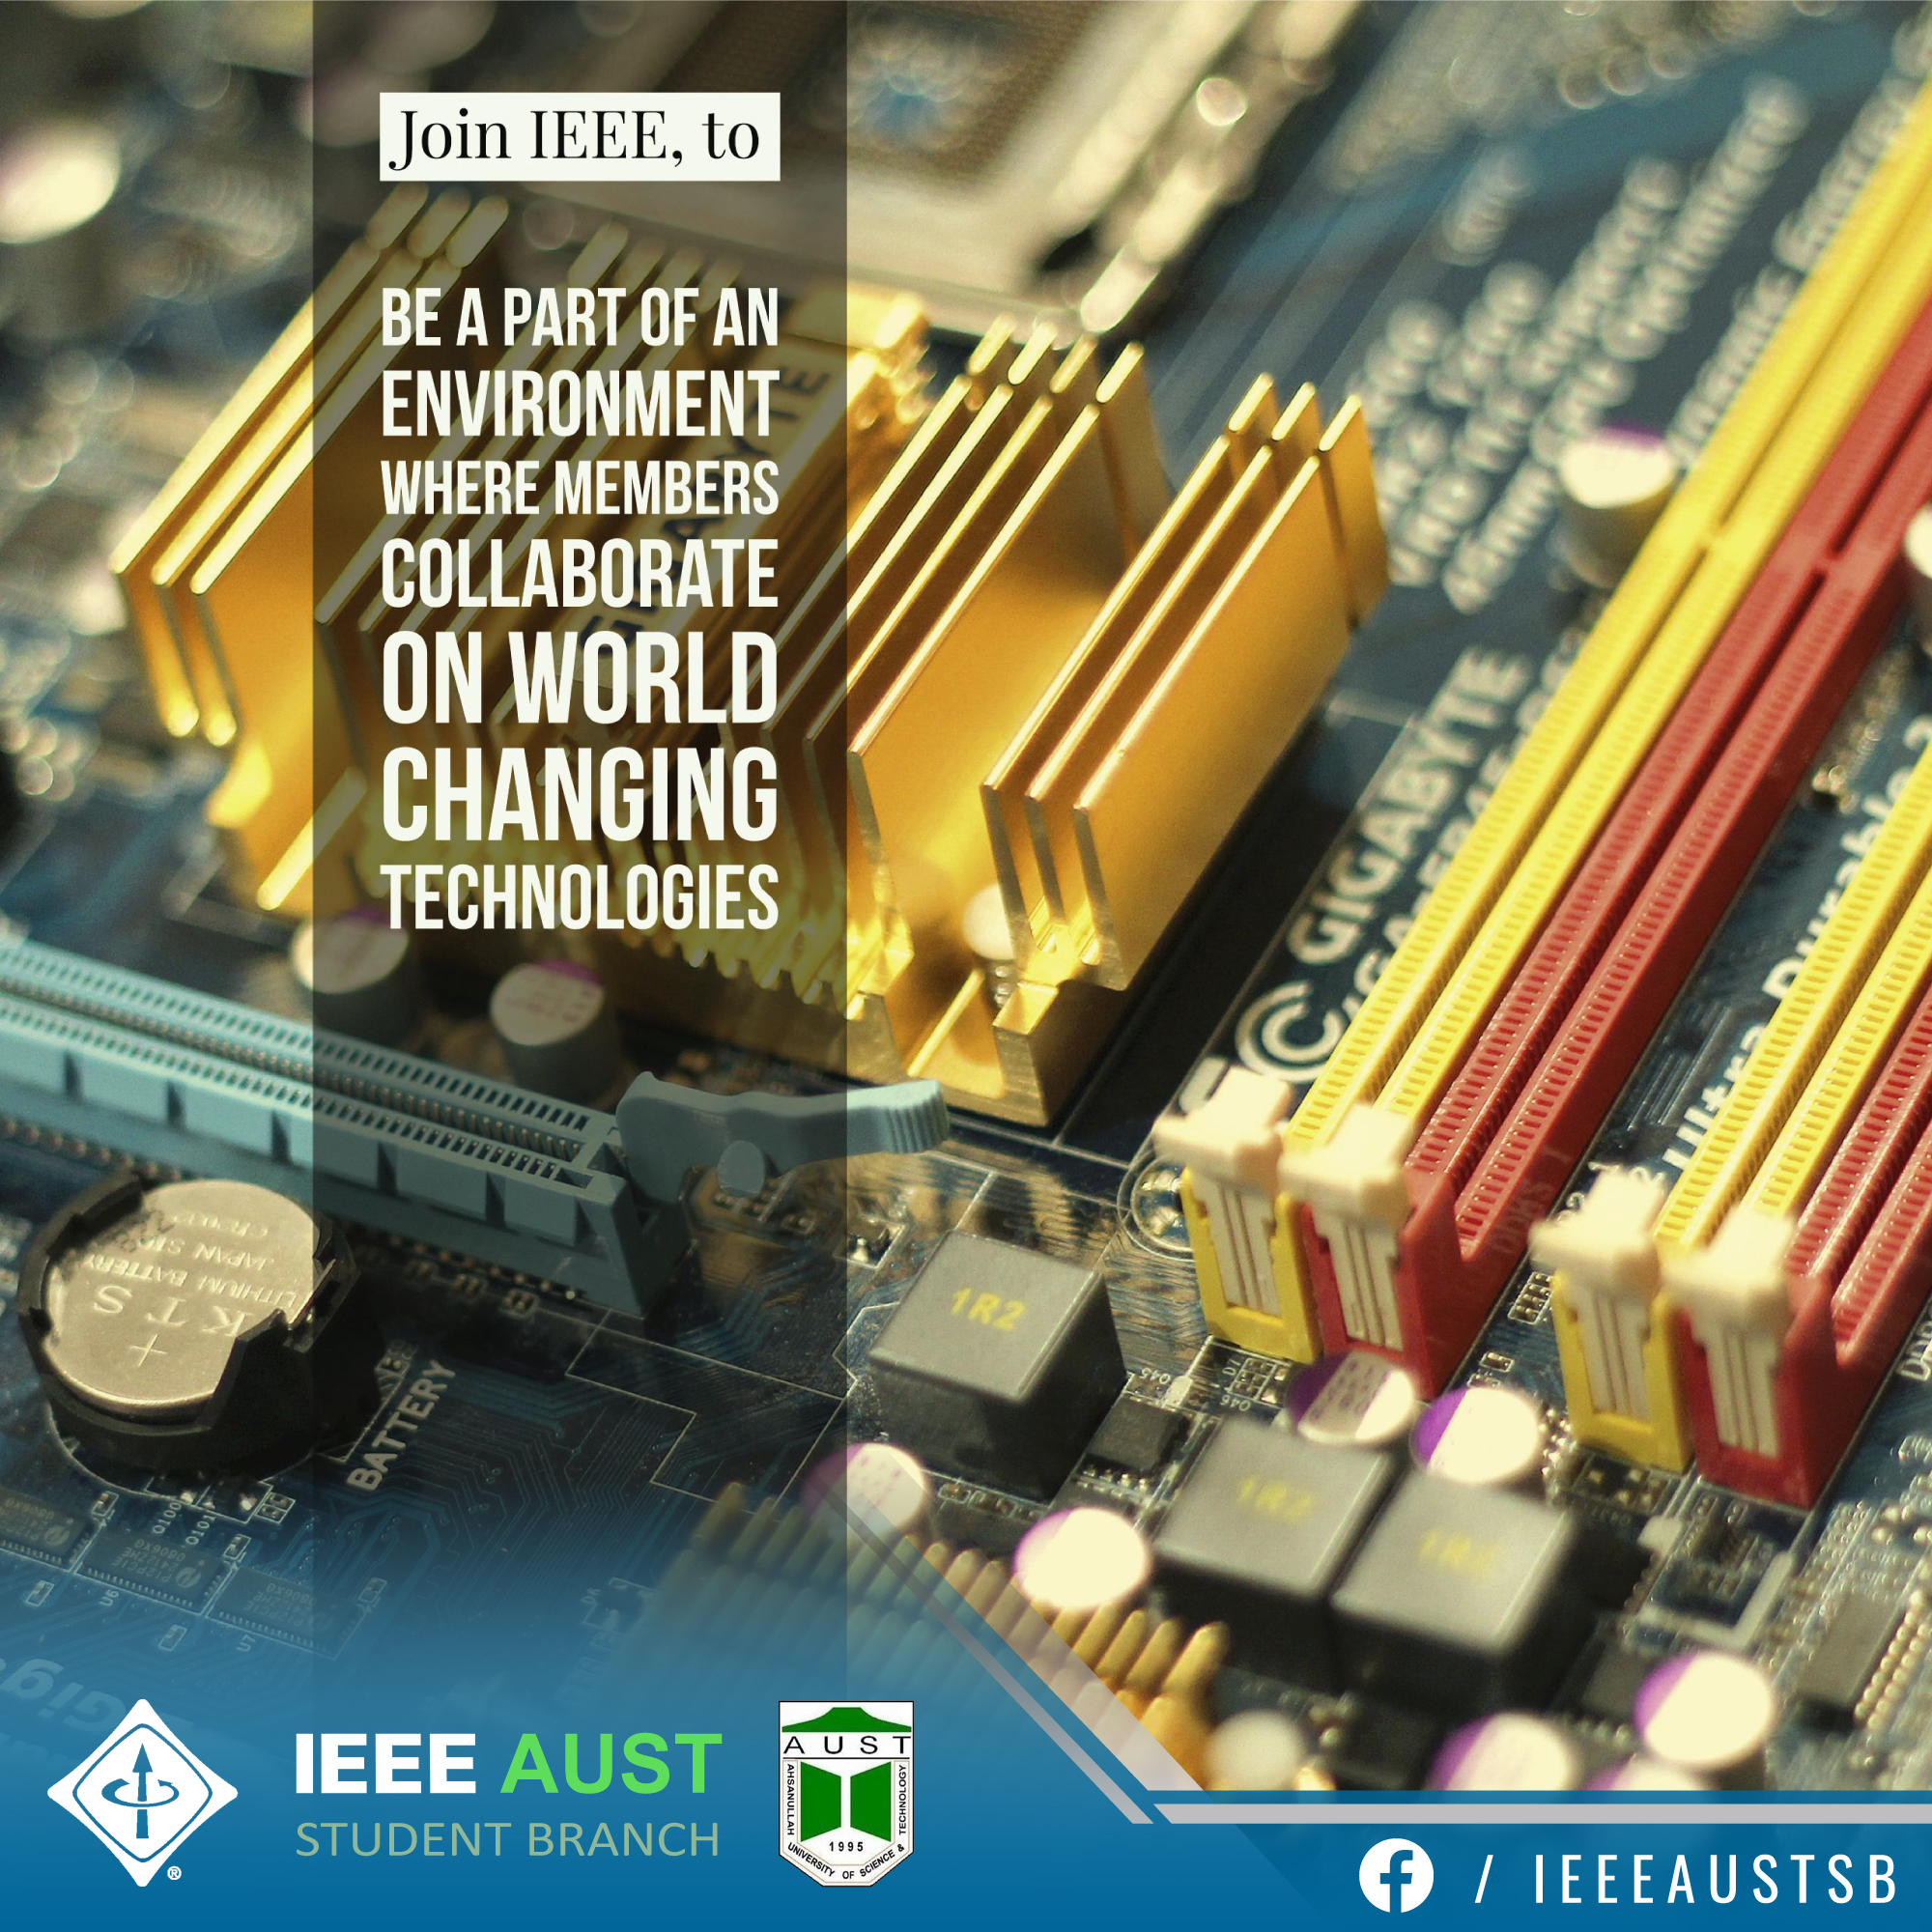 Join IEEE to be a part of an environment where members collaborate on world changing technologies.